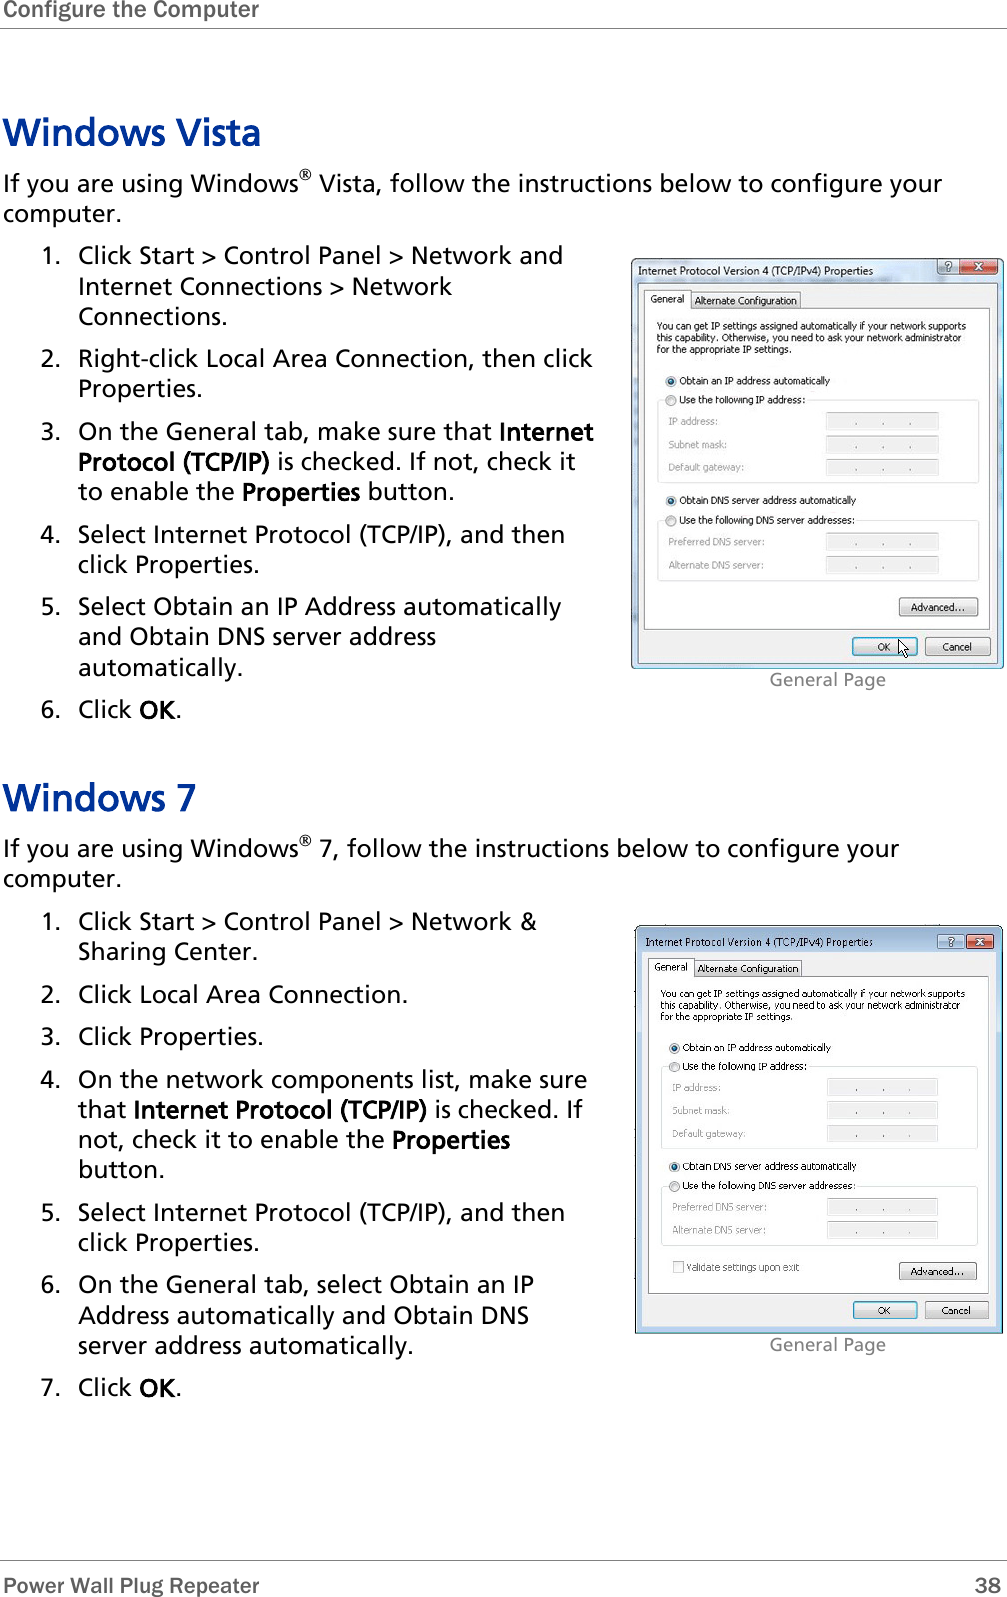 Configure the Computer   Power Wall Plug Repeater       38 Windows Vista If you are using Windows Vista, follow the instructions below to configure your computer. 1. Click Start &gt; Control Panel &gt; Network and Internet Connections &gt; Network Connections. 2. Right-click Local Area Connection, then click Properties. 3. On the General tab, make sure that Internet Protocol (TCP/IP) is checked. If not, check it to enable the Properties button. 4. Select Internet Protocol (TCP/IP), and then click Properties. 5. Select Obtain an IP Address automatically and Obtain DNS server address automatically. 6. Click OK.                               General Page Windows 7 If you are using Windows 7, follow the instructions below to configure your computer. 1. Click Start &gt; Control Panel &gt; Network &amp; Sharing Center.  2. Click Local Area Connection. 3. Click Properties. 4. On the network components list, make sure that Internet Protocol (TCP/IP) is checked. If not, check it to enable the Properties button. 5. Select Internet Protocol (TCP/IP), and then click Properties. 6. On the General tab, select Obtain an IP Address automatically and Obtain DNS server address automatically. 7. Click OK.                               General Page 